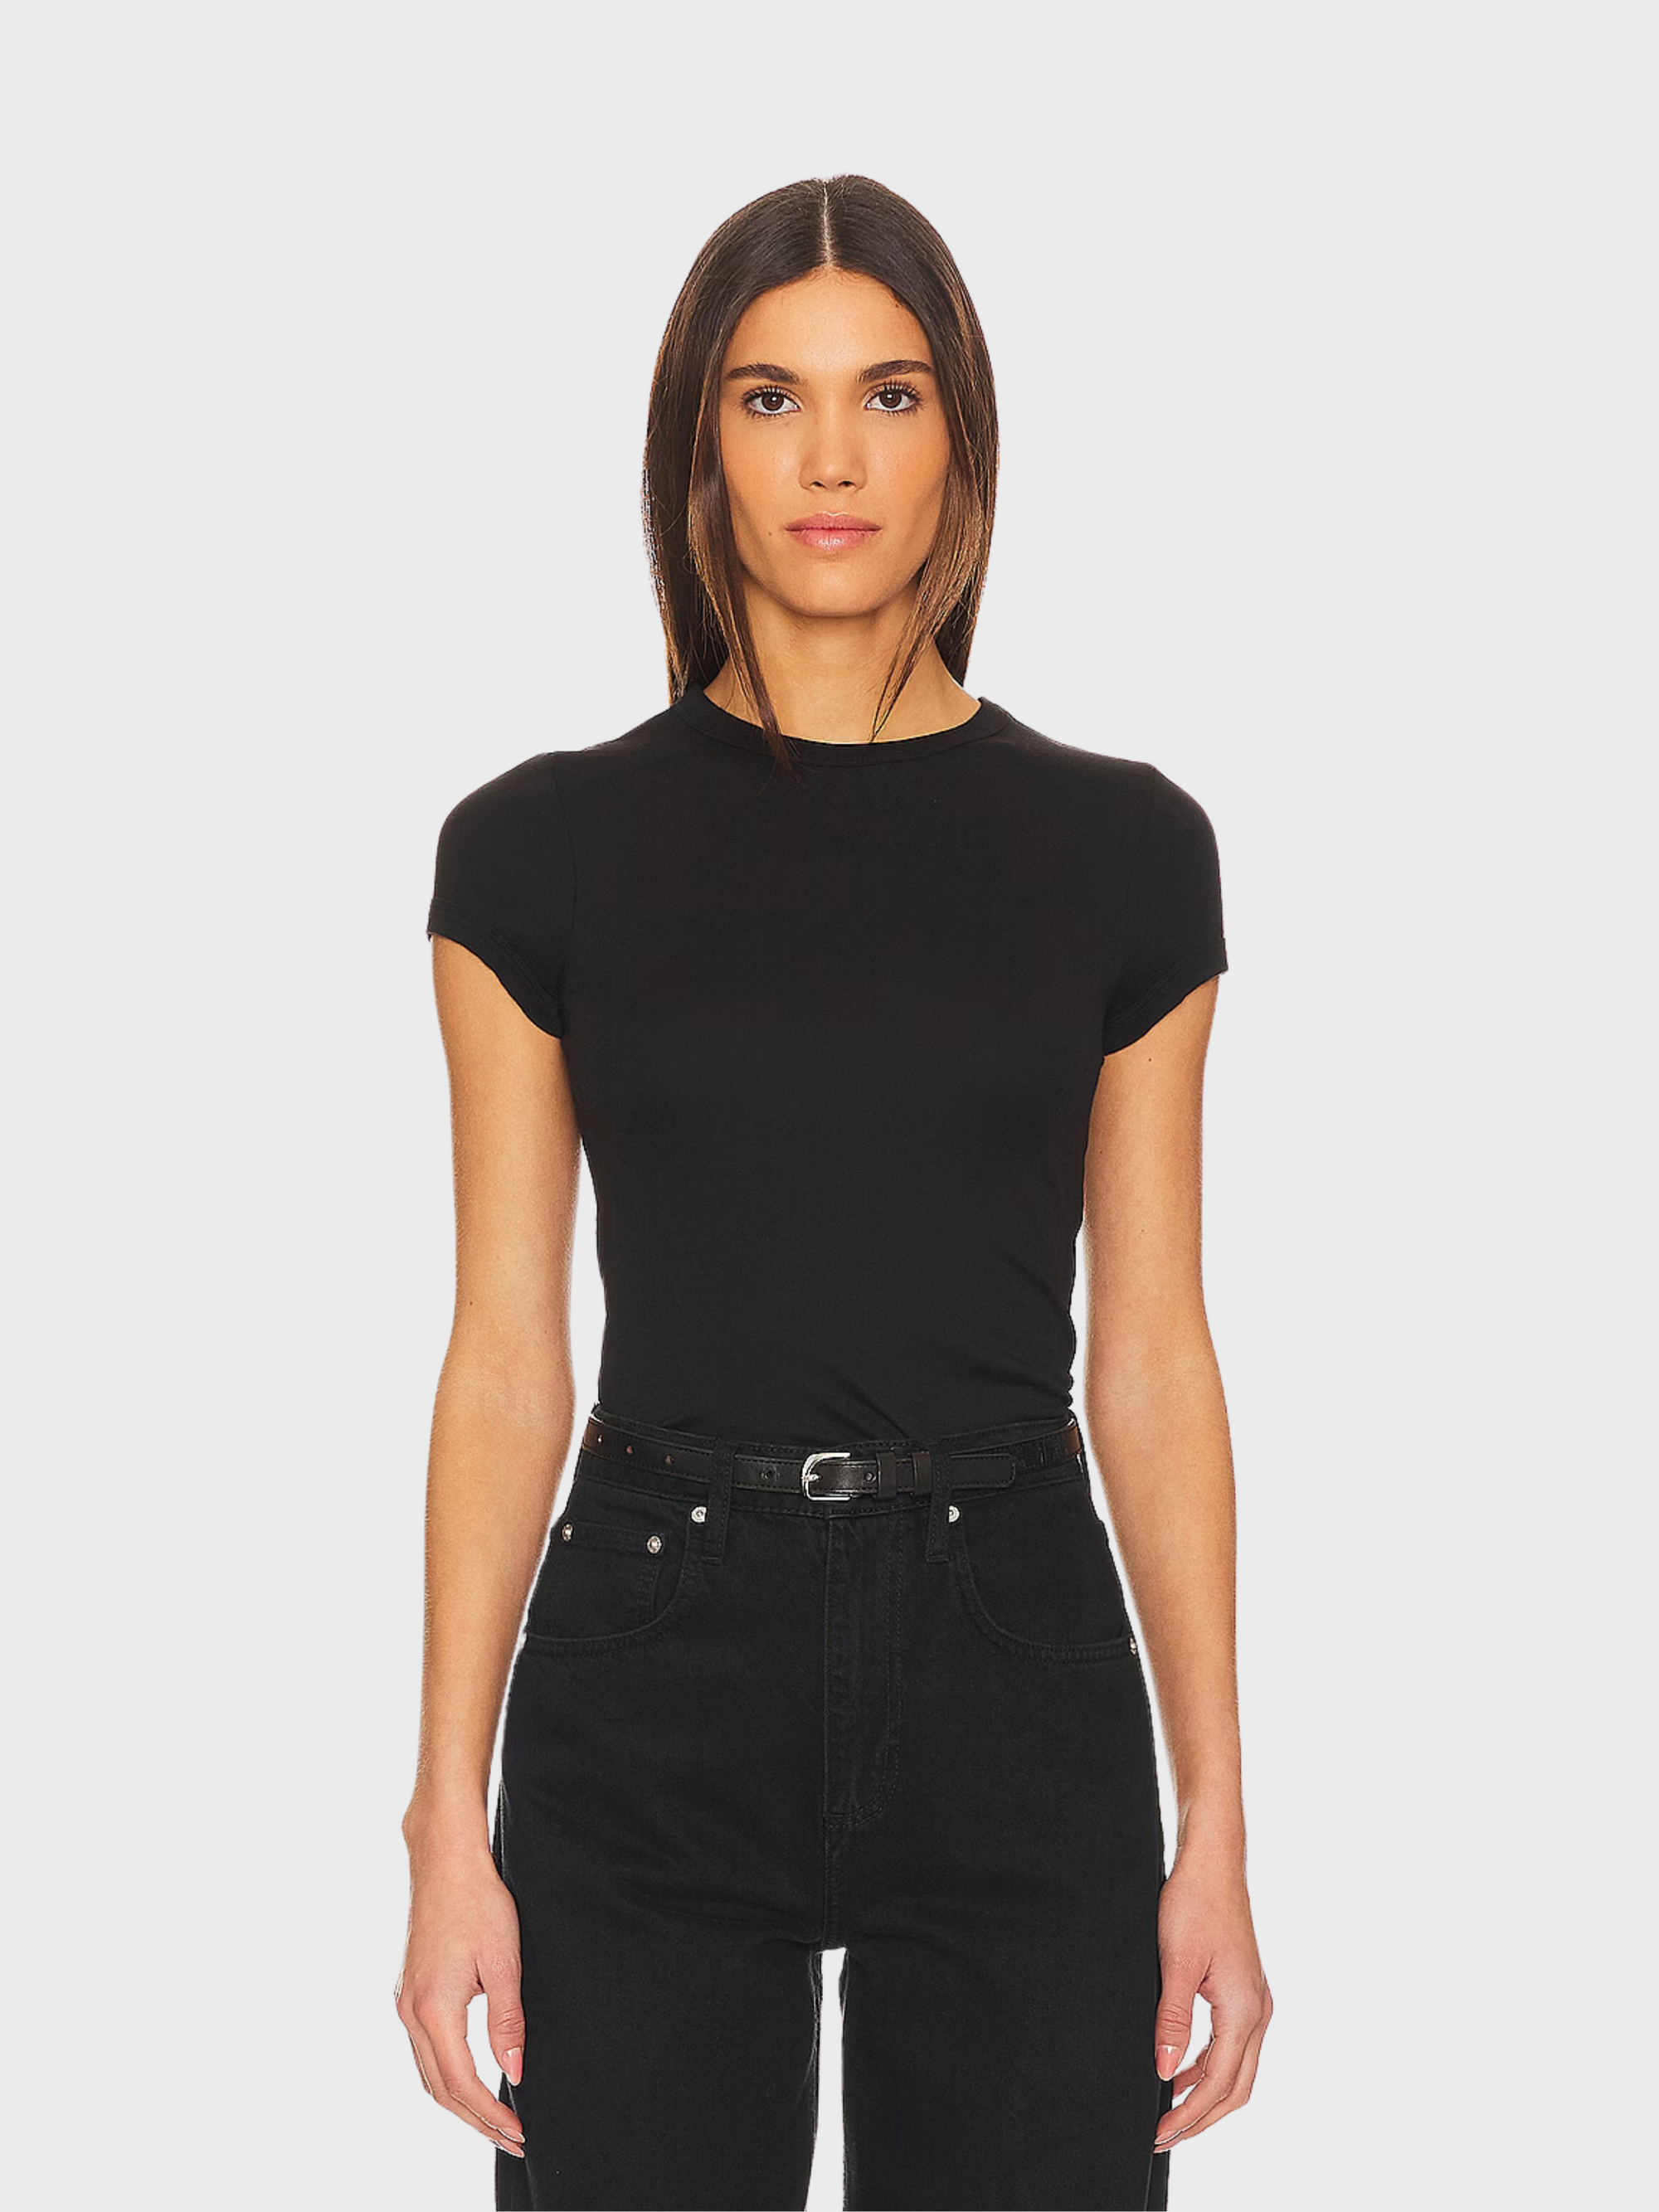 Enza Costa Supima Cotton Cap Sleeve Crew Black-T-Shirts-West of Woodward Boutique-Vancouver-Canada